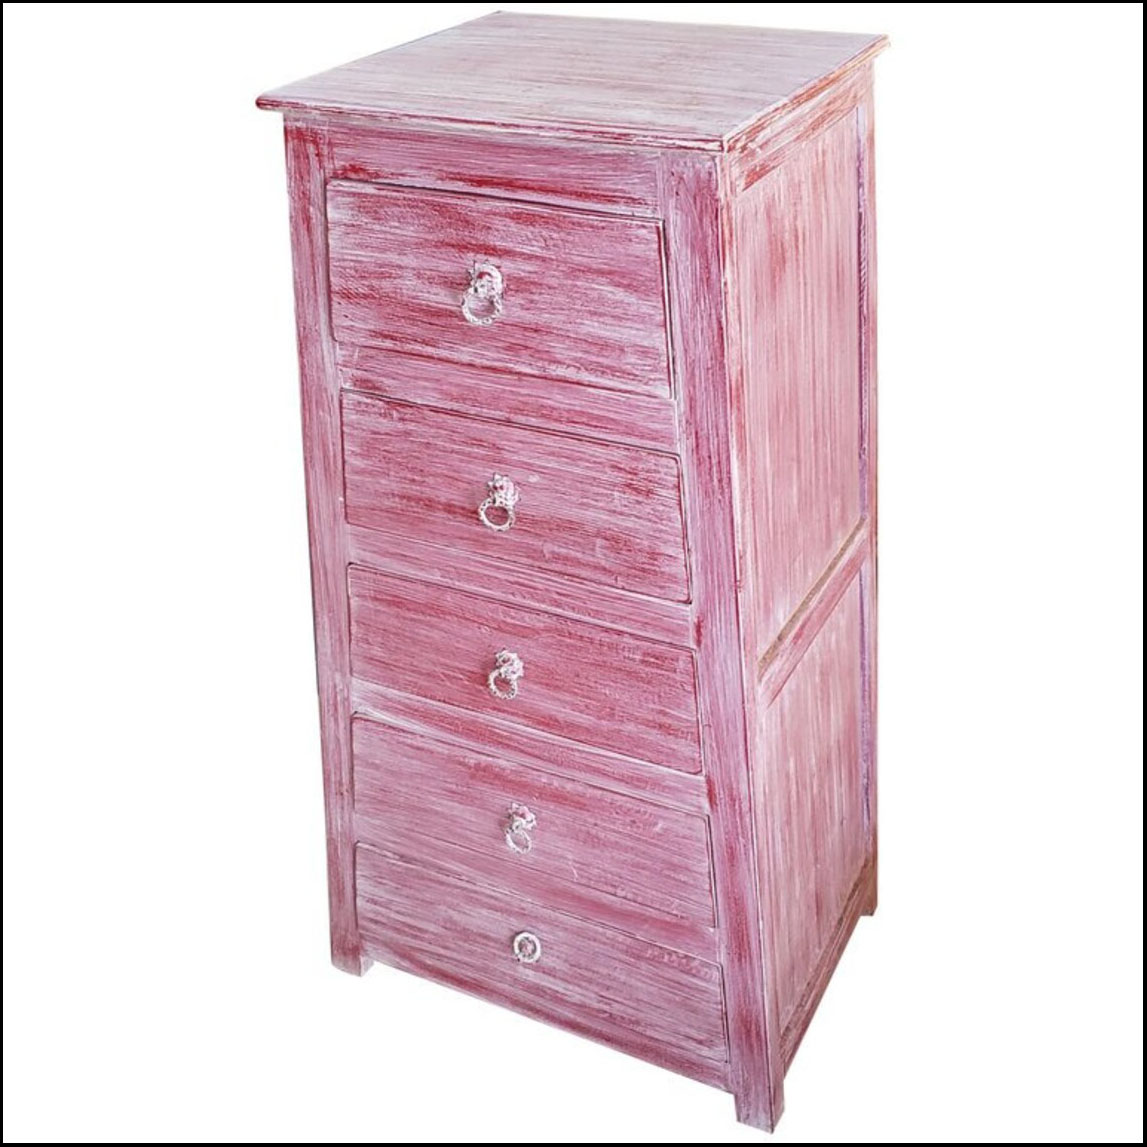 Hand Painted Wooden Moroccan Cabinet, Faded Pink